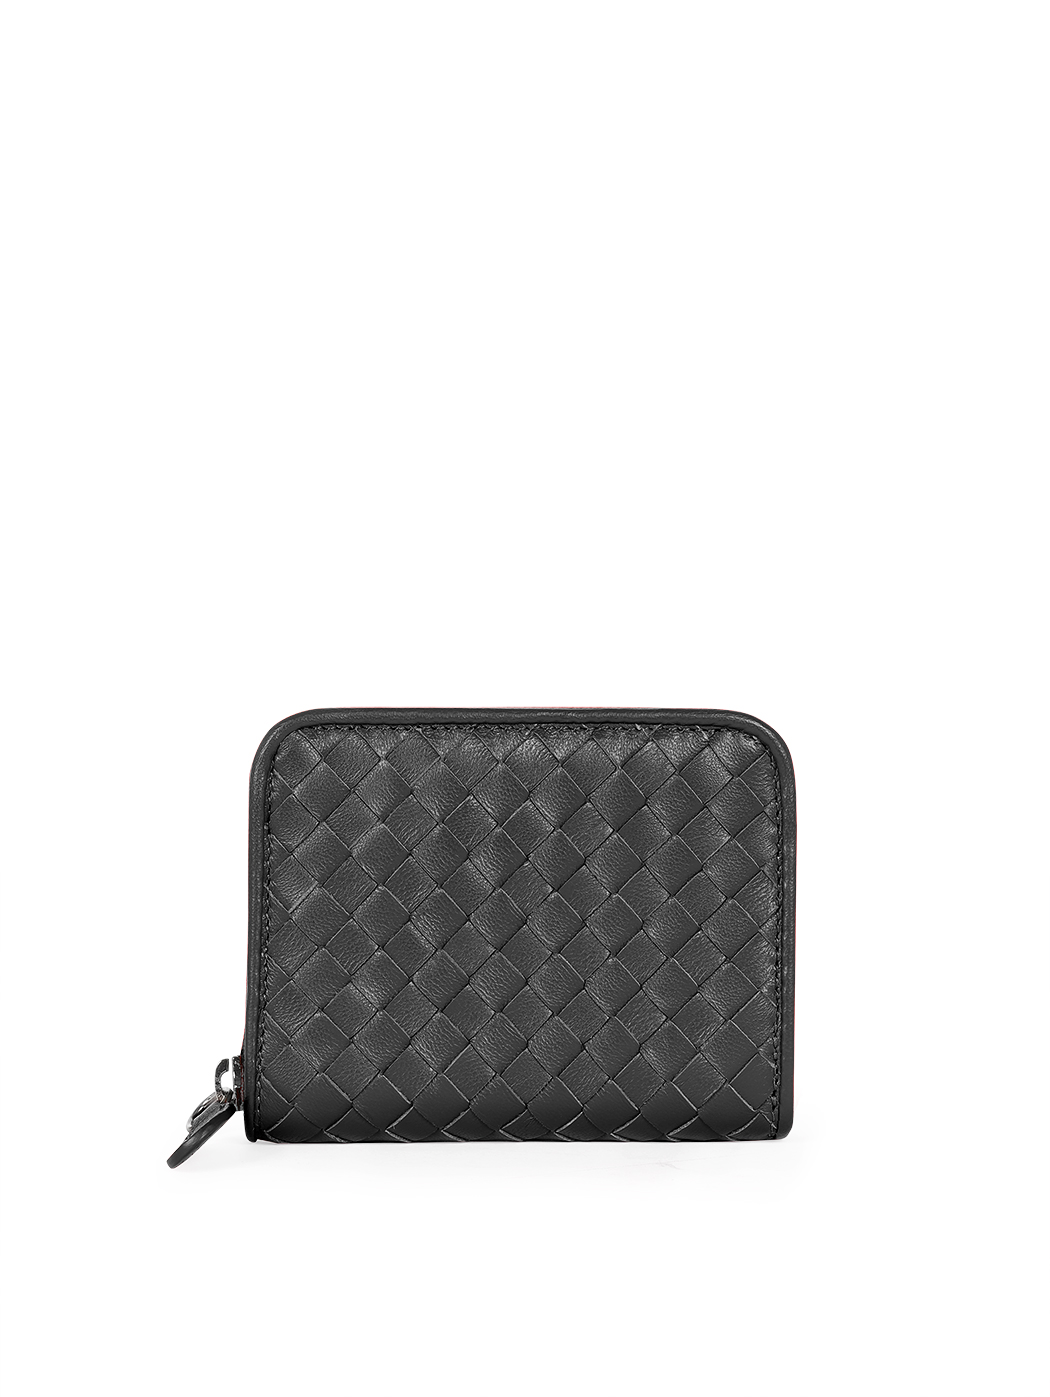 Compact zip-around wallet in black woven leather